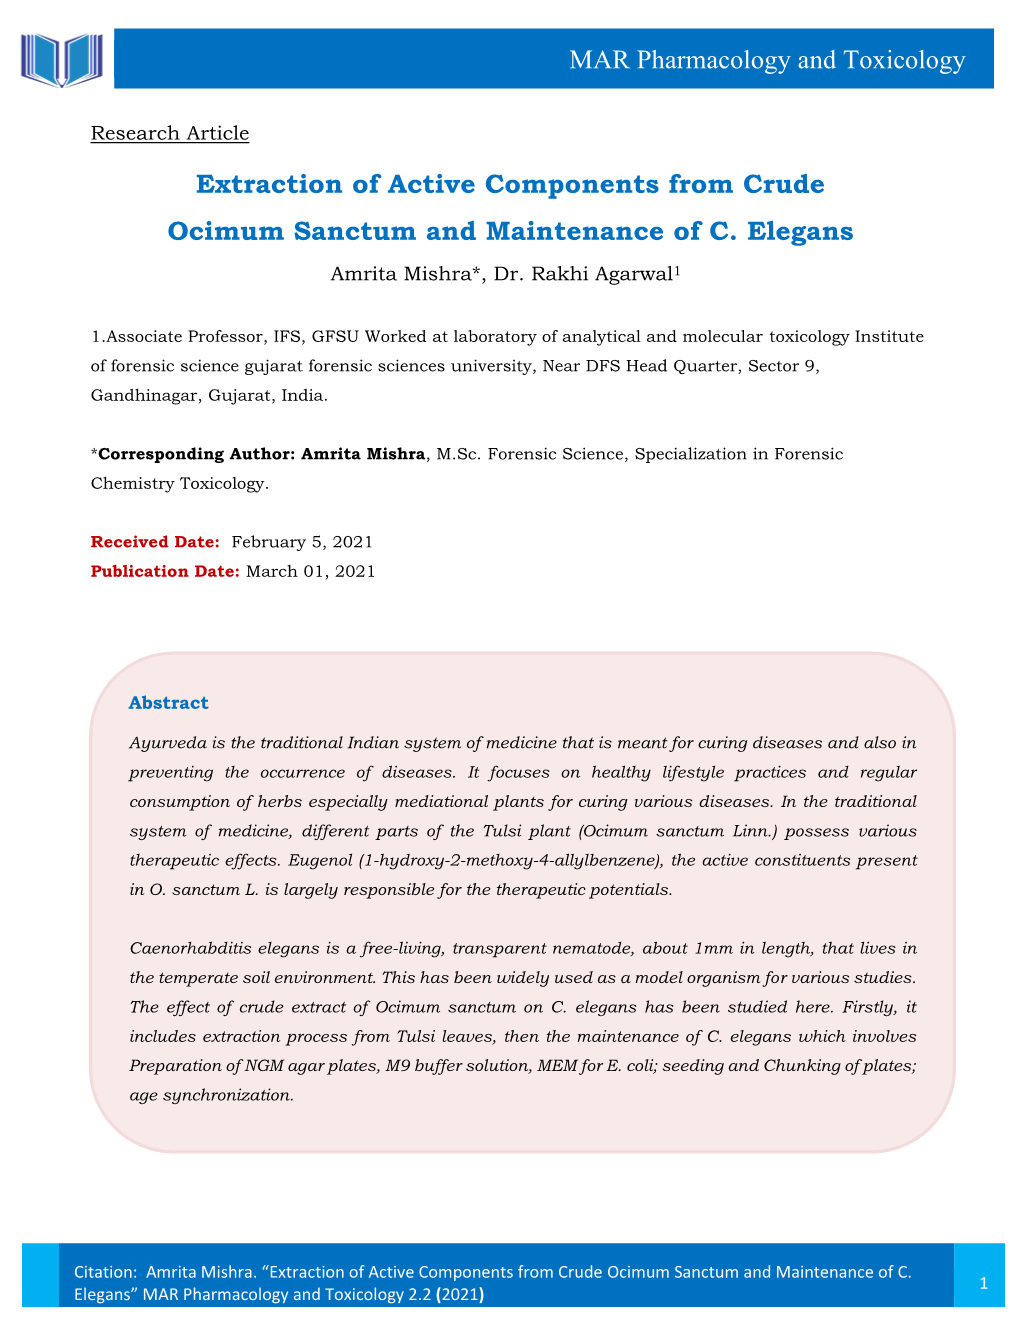 Extraction of Active Components from Crude Ocimum Sanctum and Maintenance of C